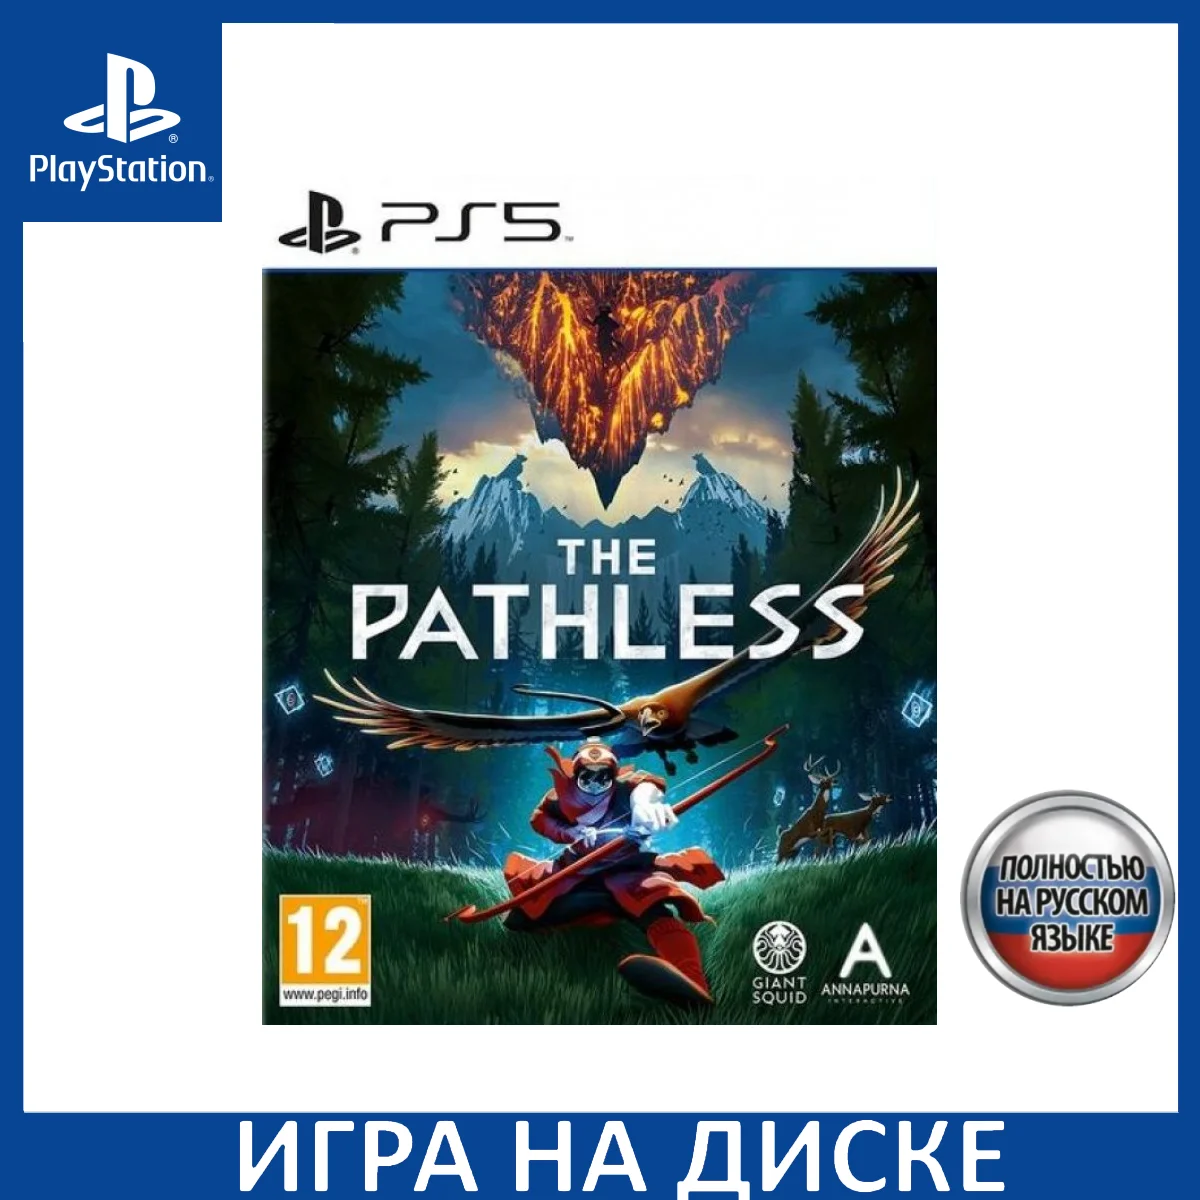 The Pathless Russian version (PS5) Disk - AliExpress